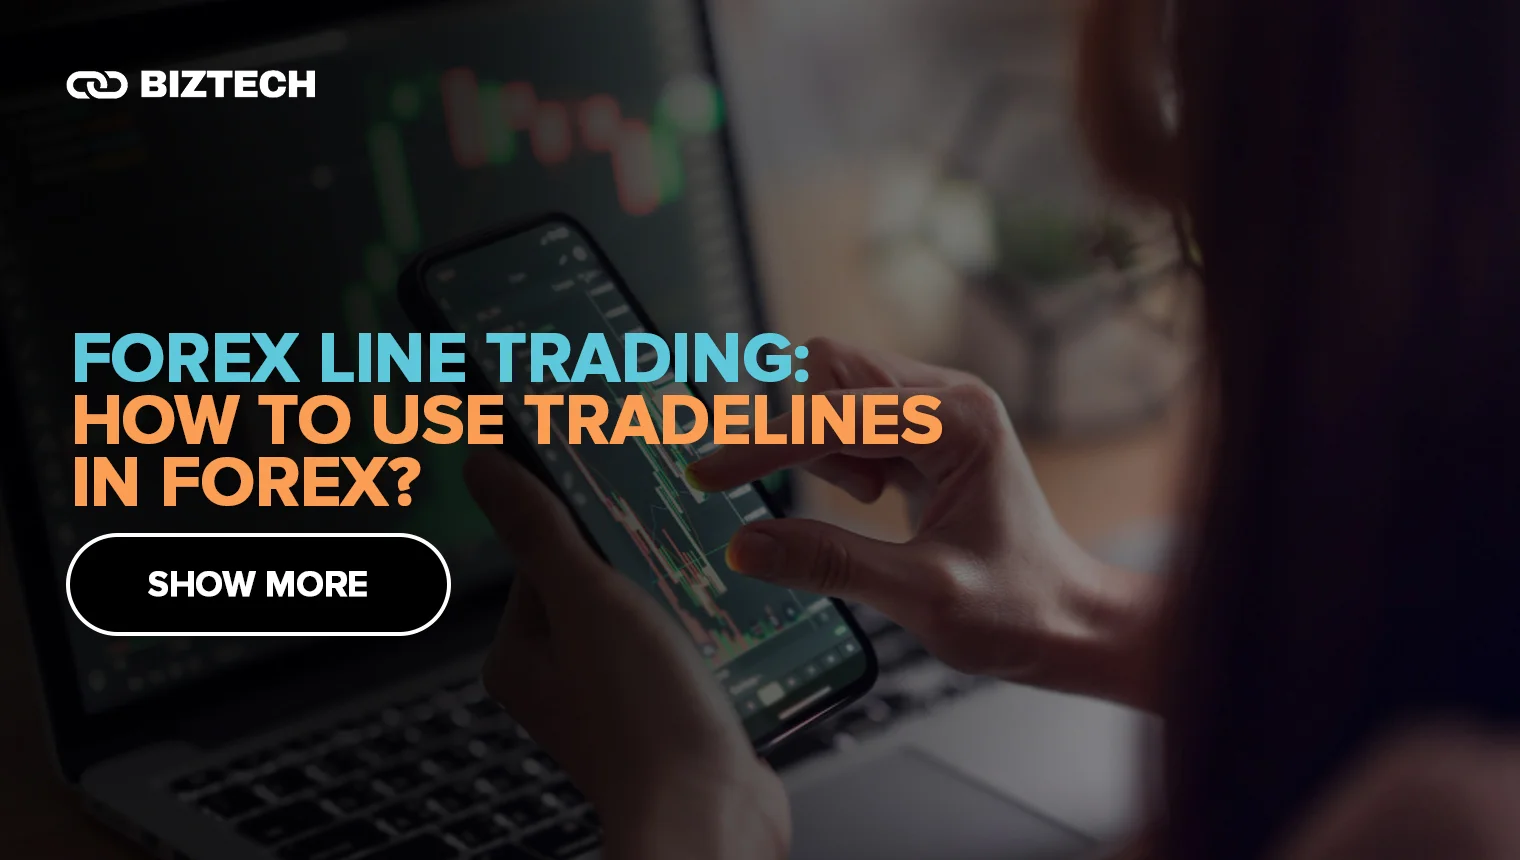 How to Use Tradelines in Forex